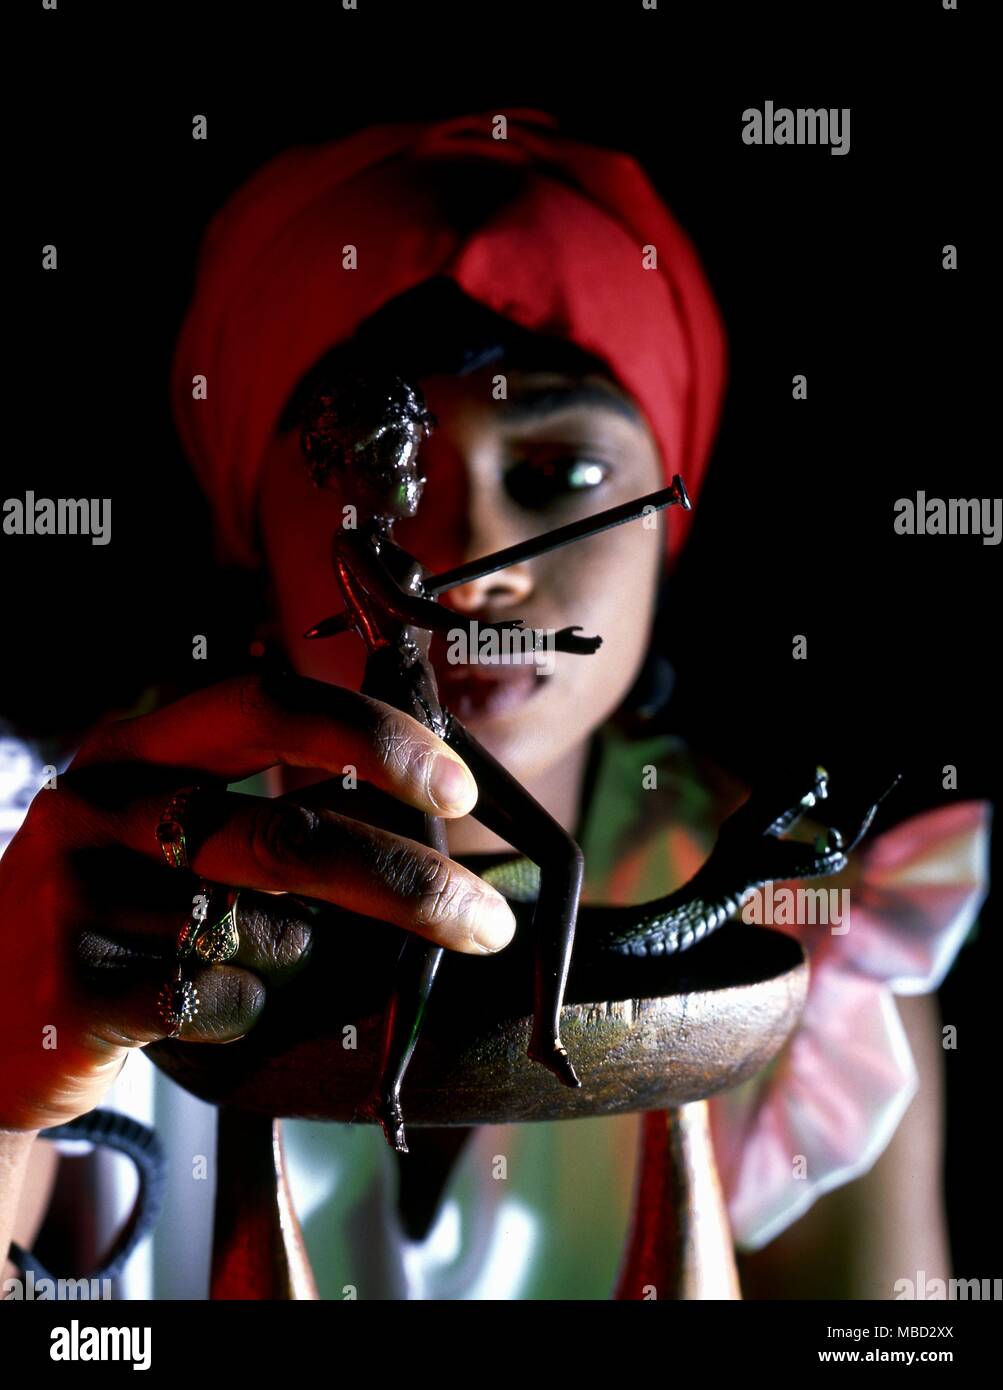 Voodoo spell. A small doll nailed through to bring illness or even death to the person it represents. Stock Photo